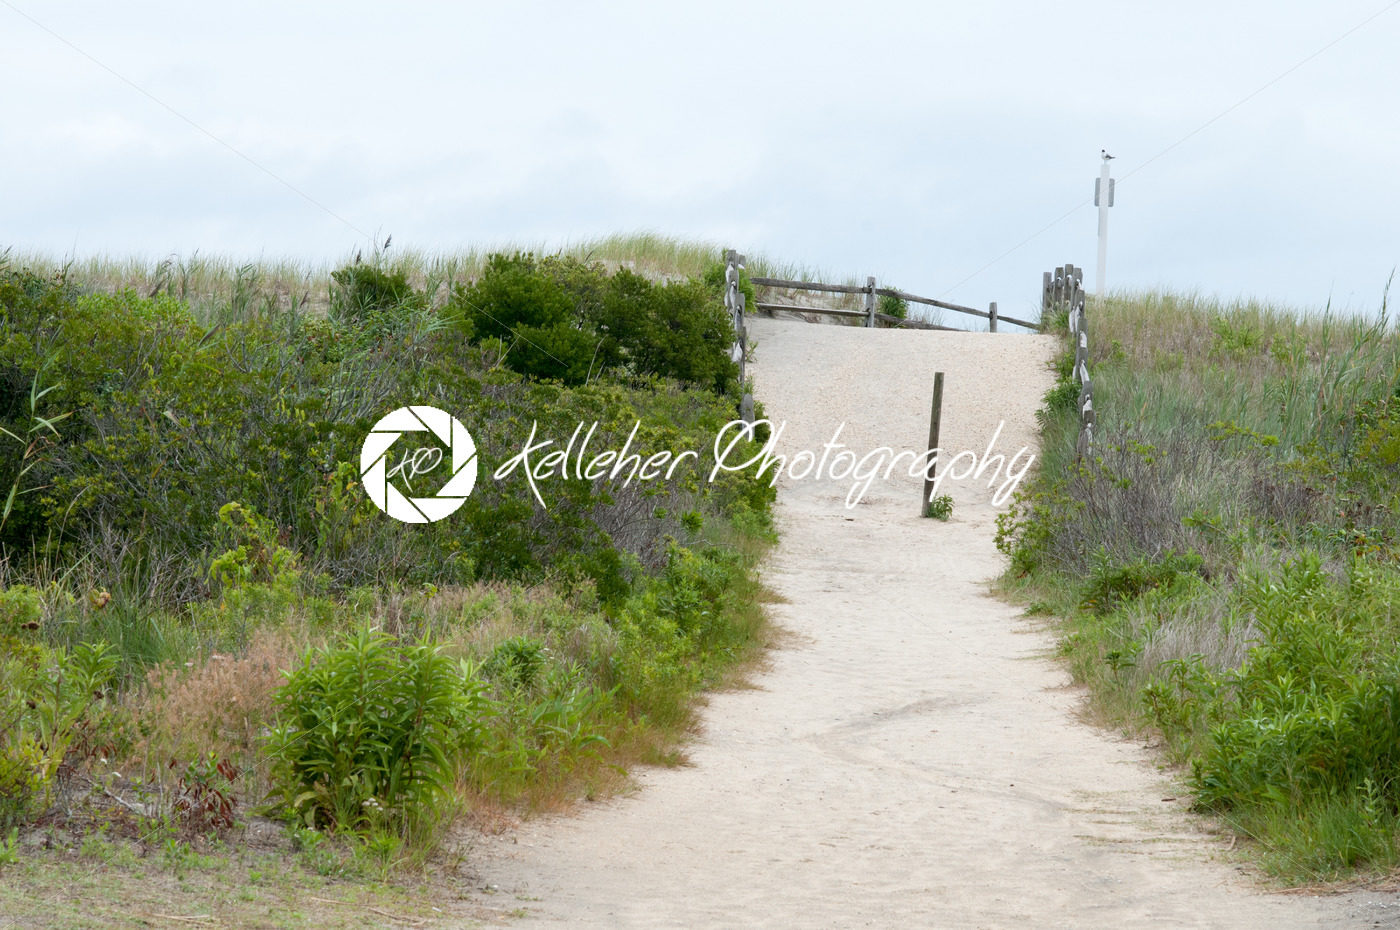 Sand dunes along the New Jersey shore in Wildwood - Kelleher Photography Store